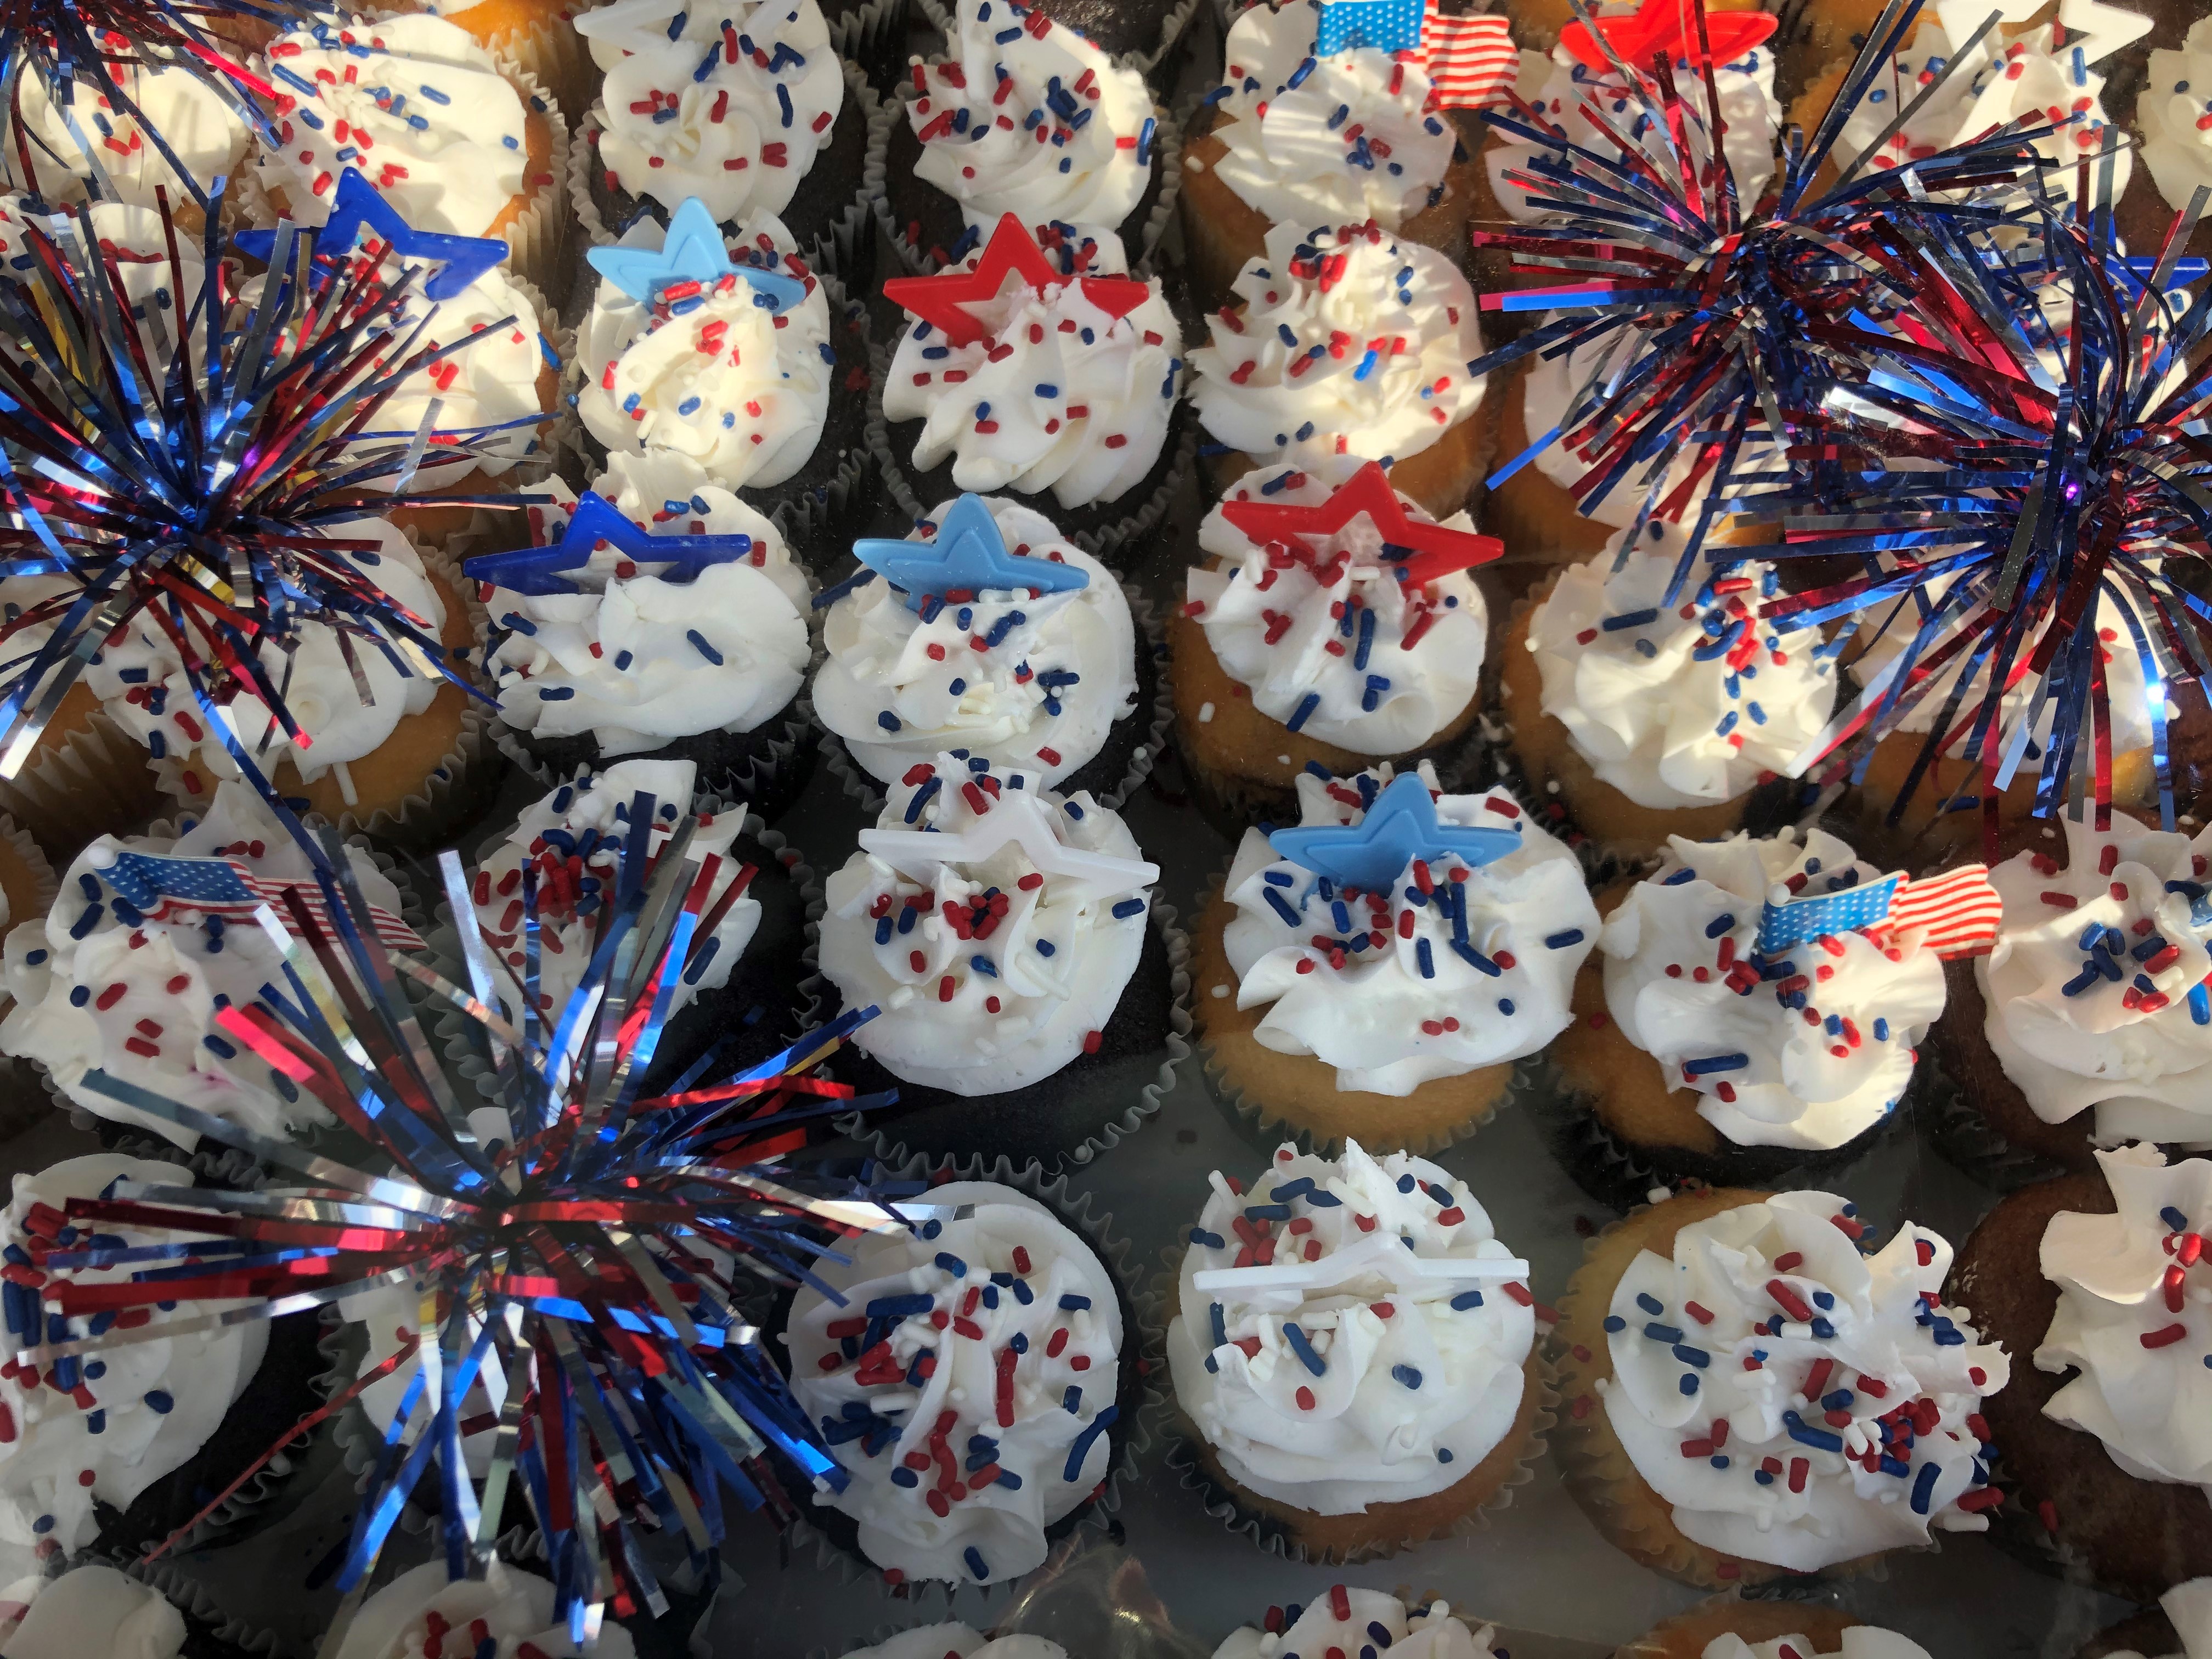 A sweet treat for veterans!